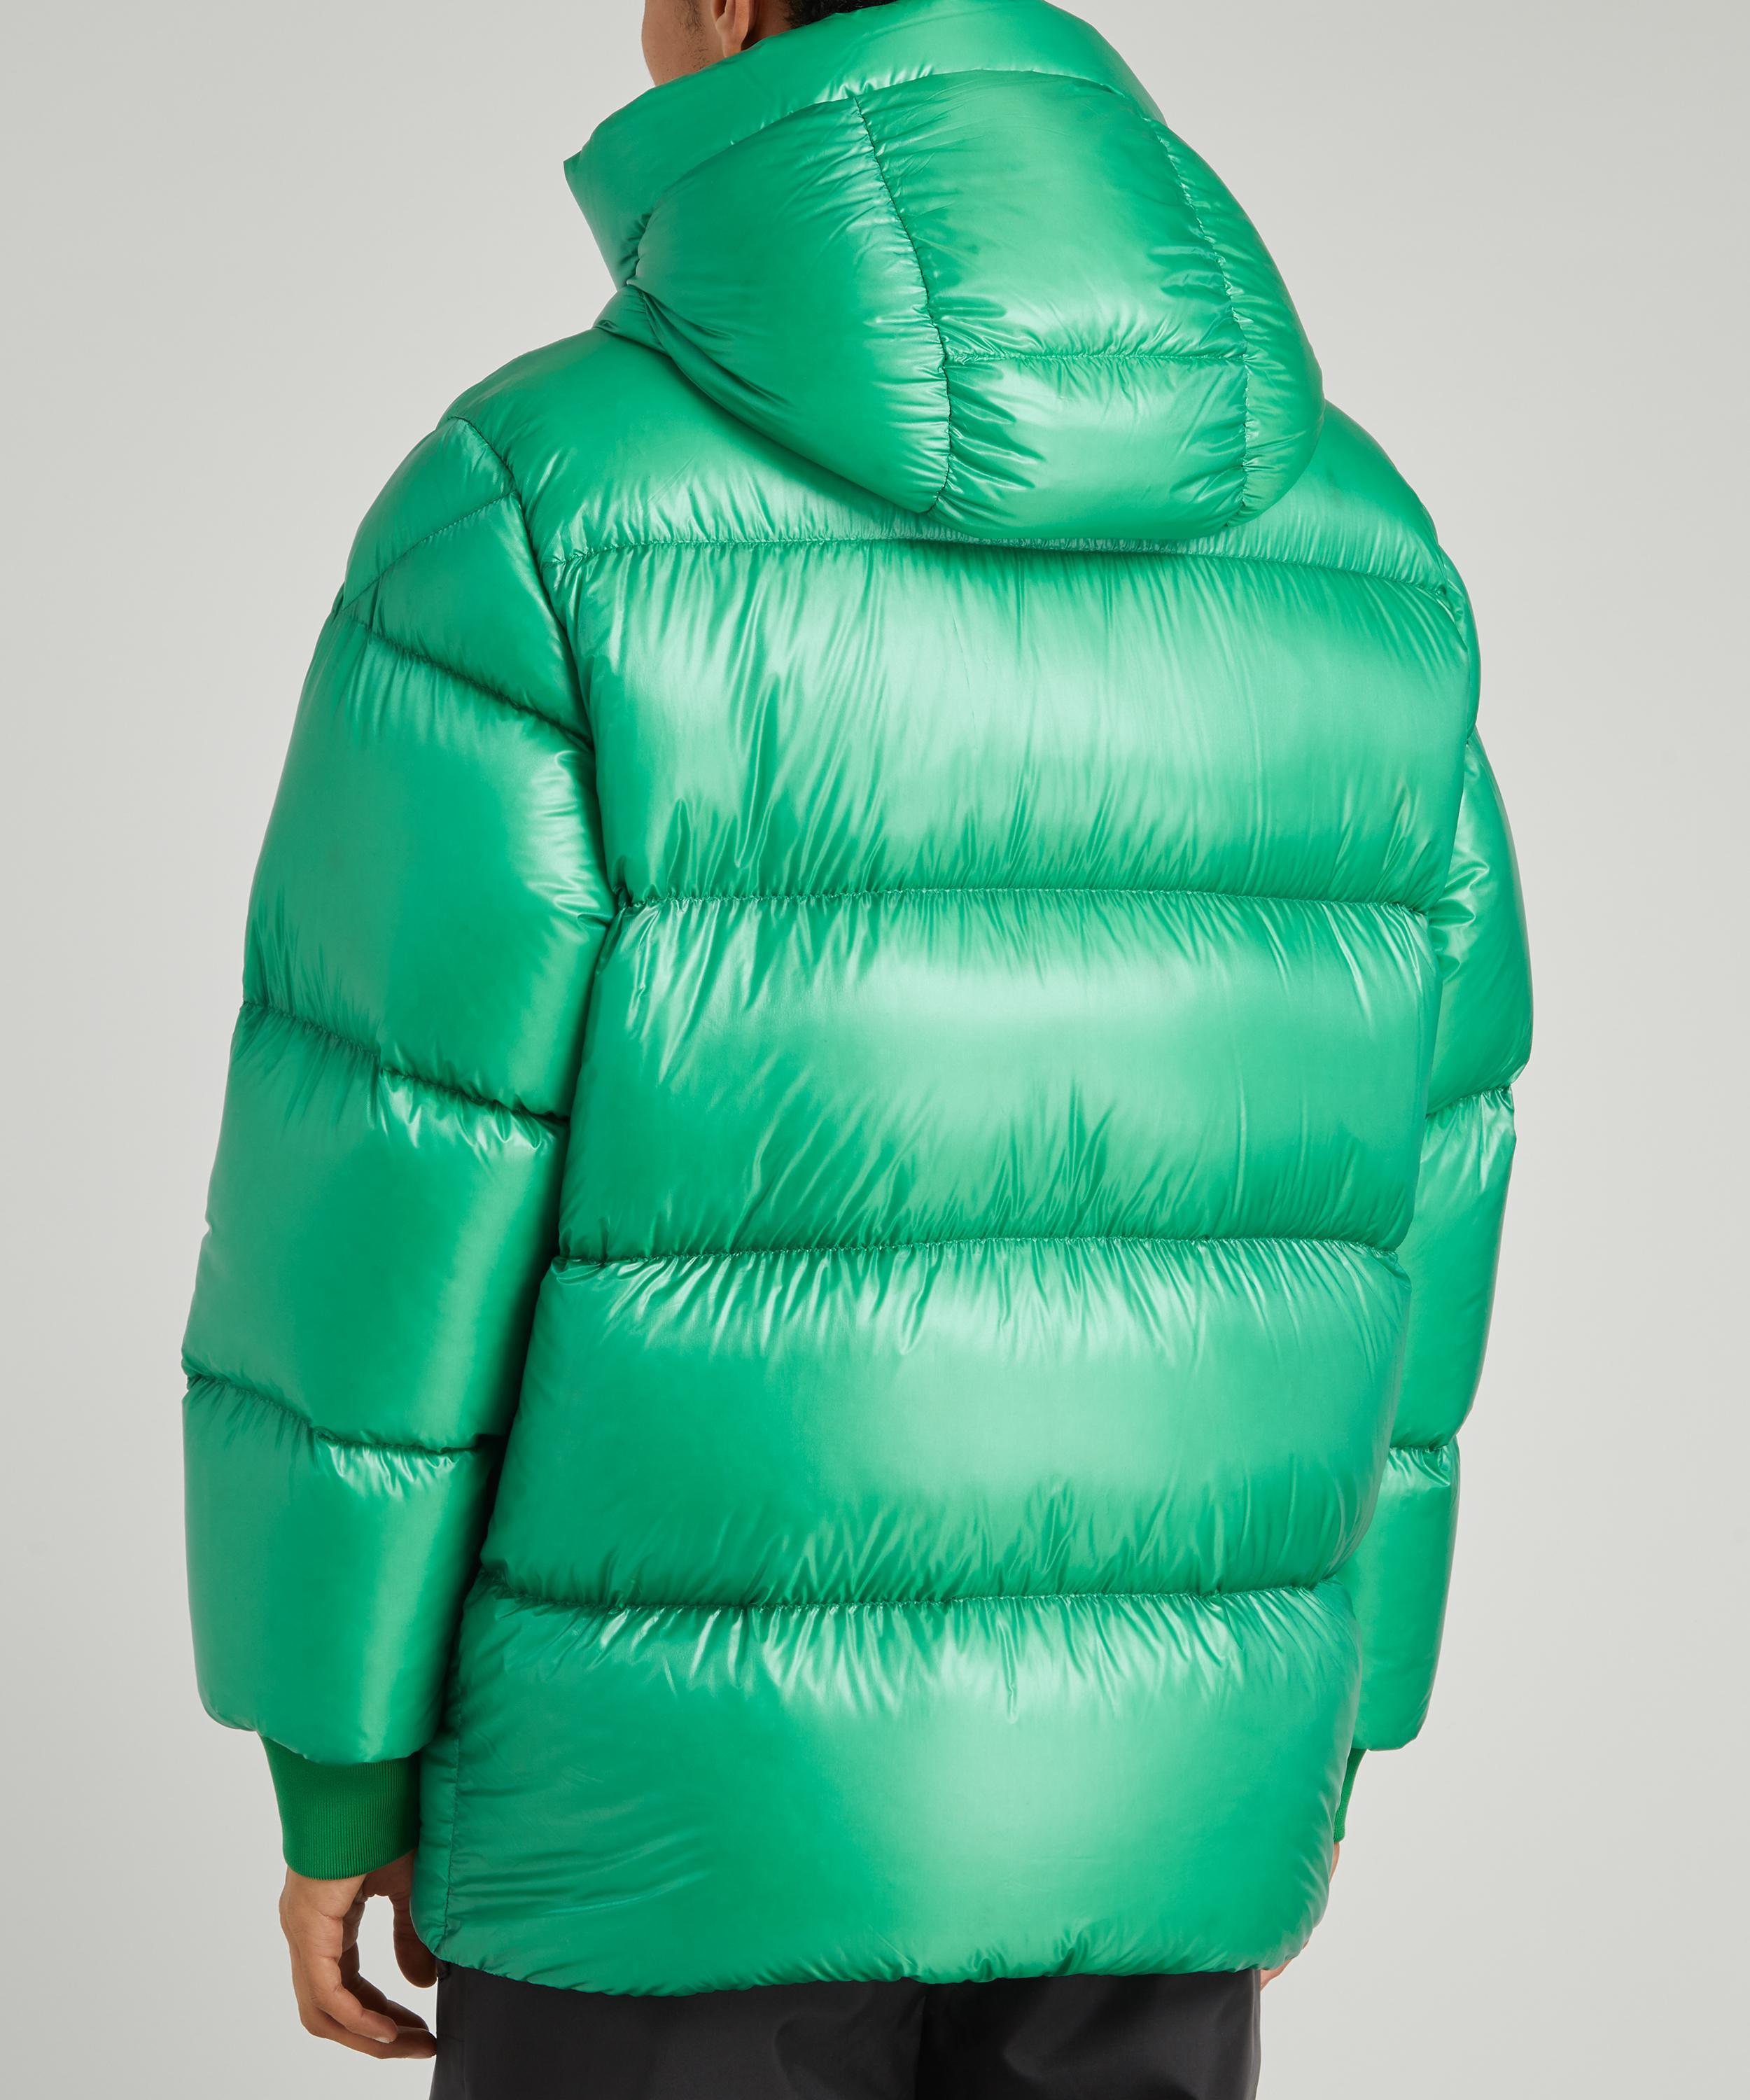 Moncler Synthetic Lamentin Down Jacket in Green for Men - Lyst